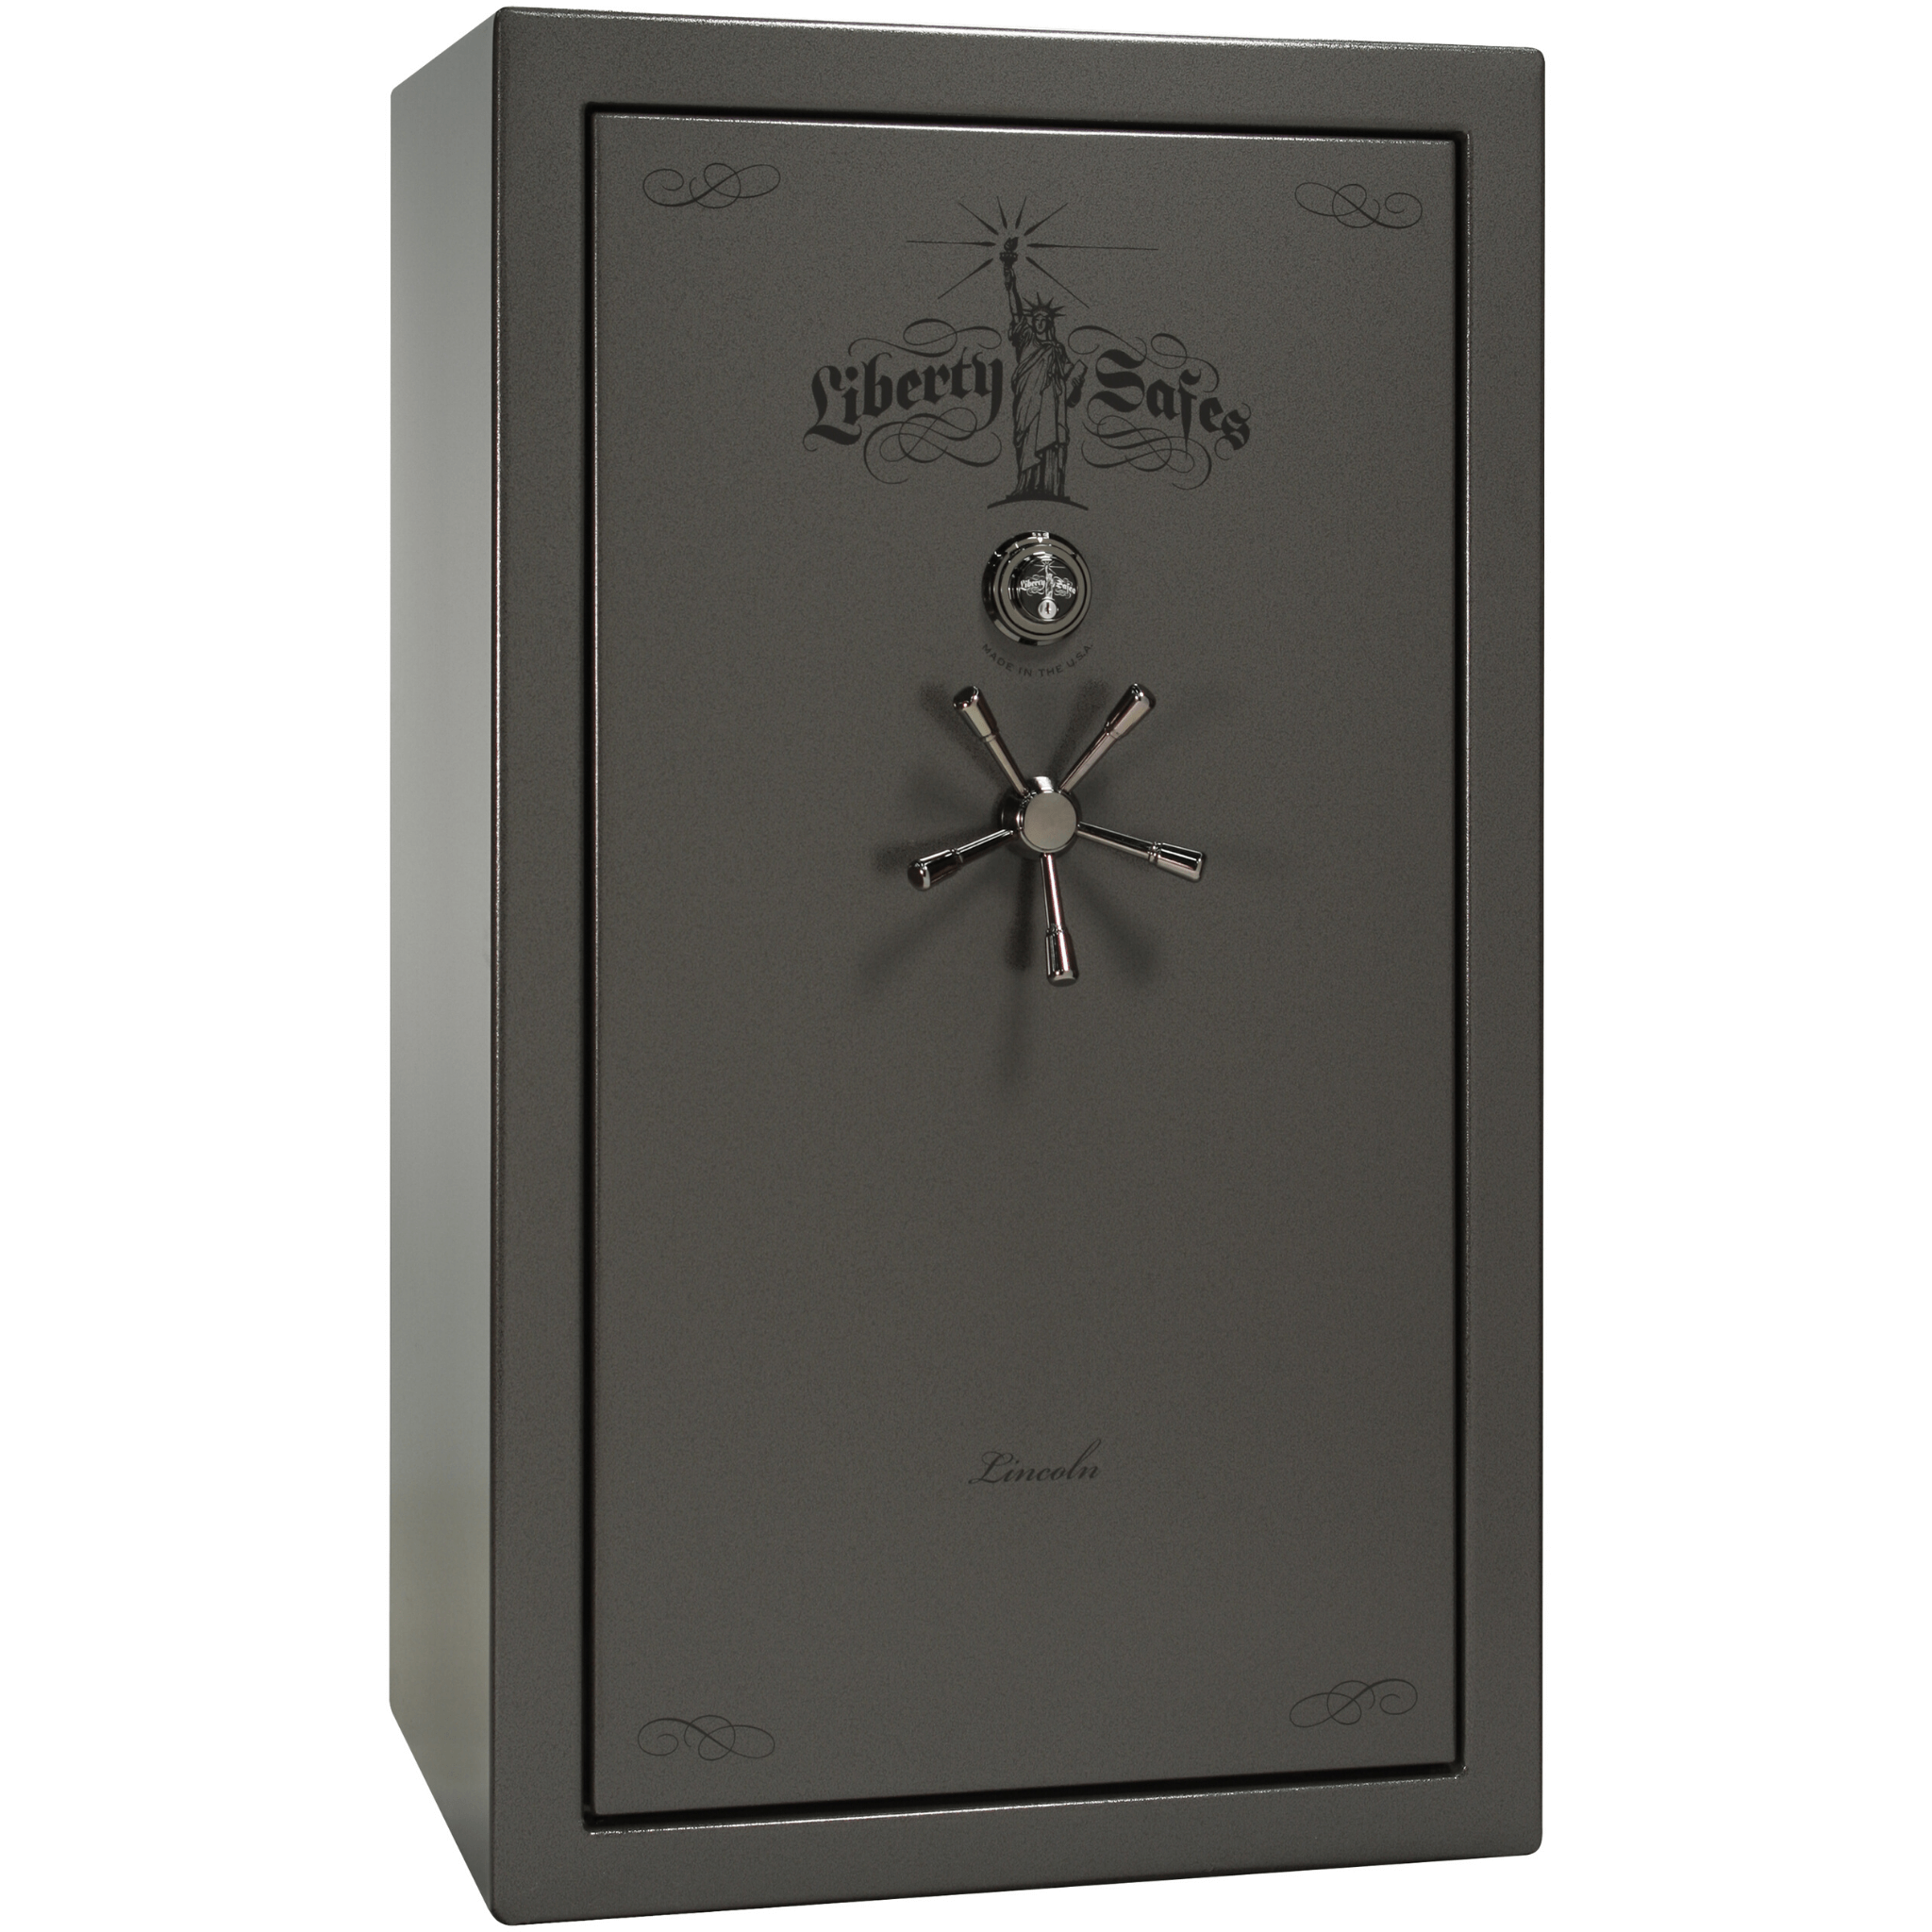 Lincoln Series | Level 5 Security | 110 Minute Fire Protection | 50 | Dimensions: 72.5"(H) x 42"(W) x 32"(D) | Black Gloss | Mechanical Lock, photo 5